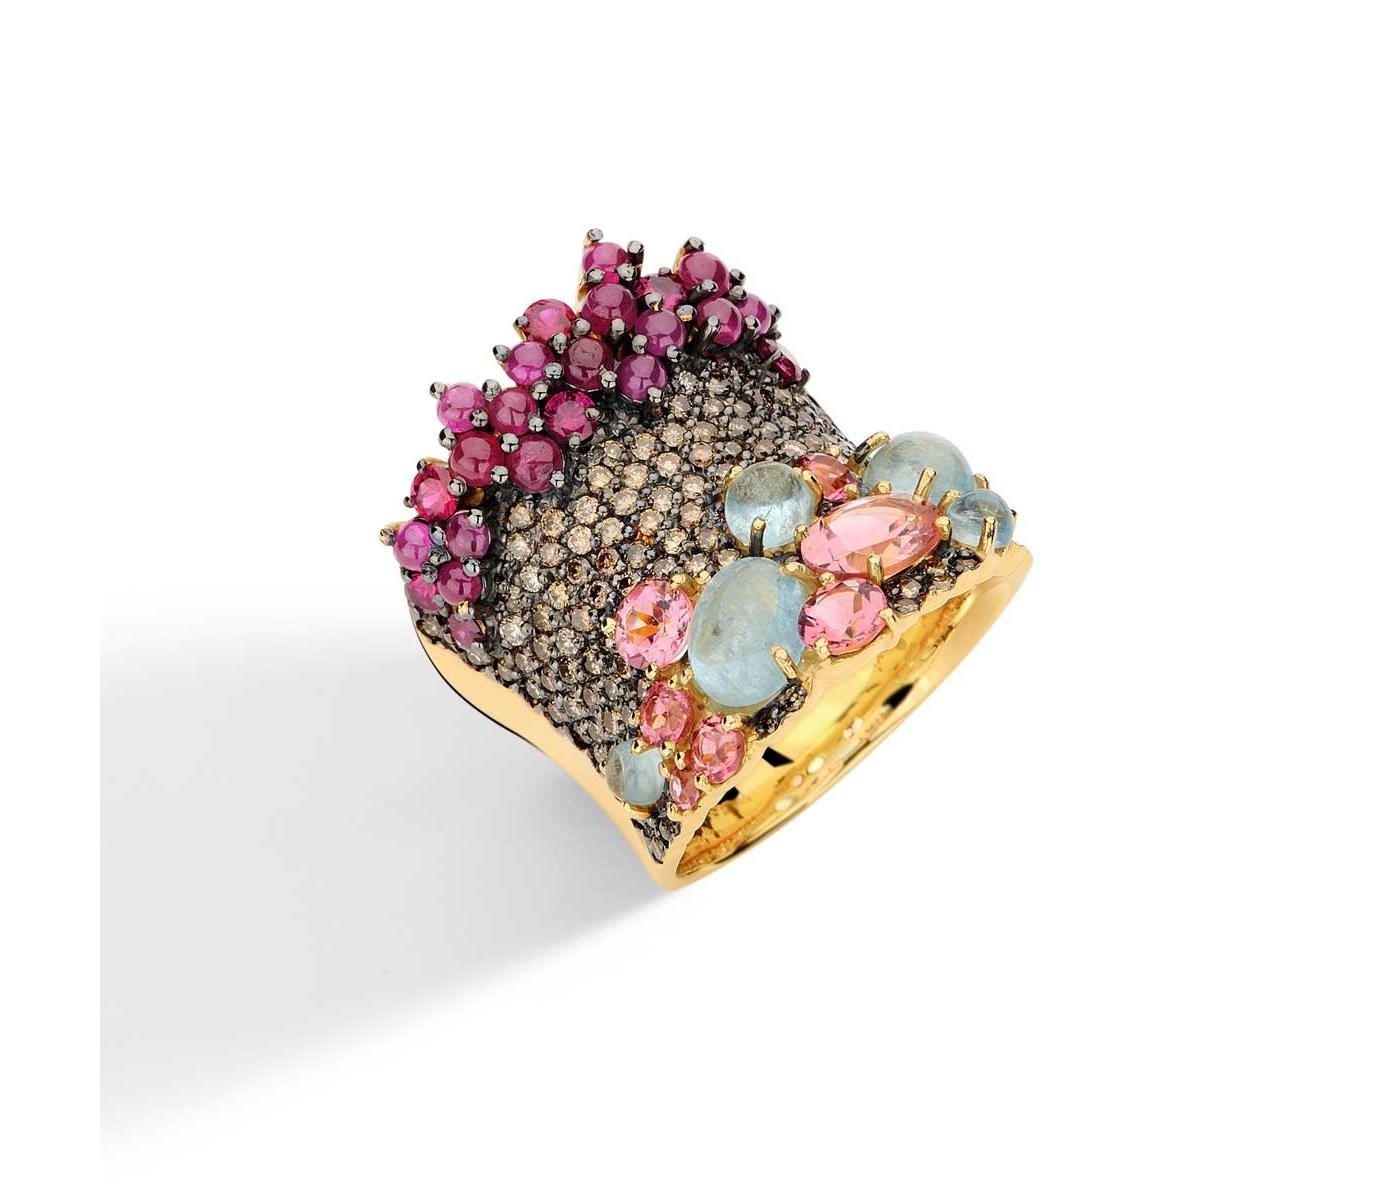 Ring by Brumani